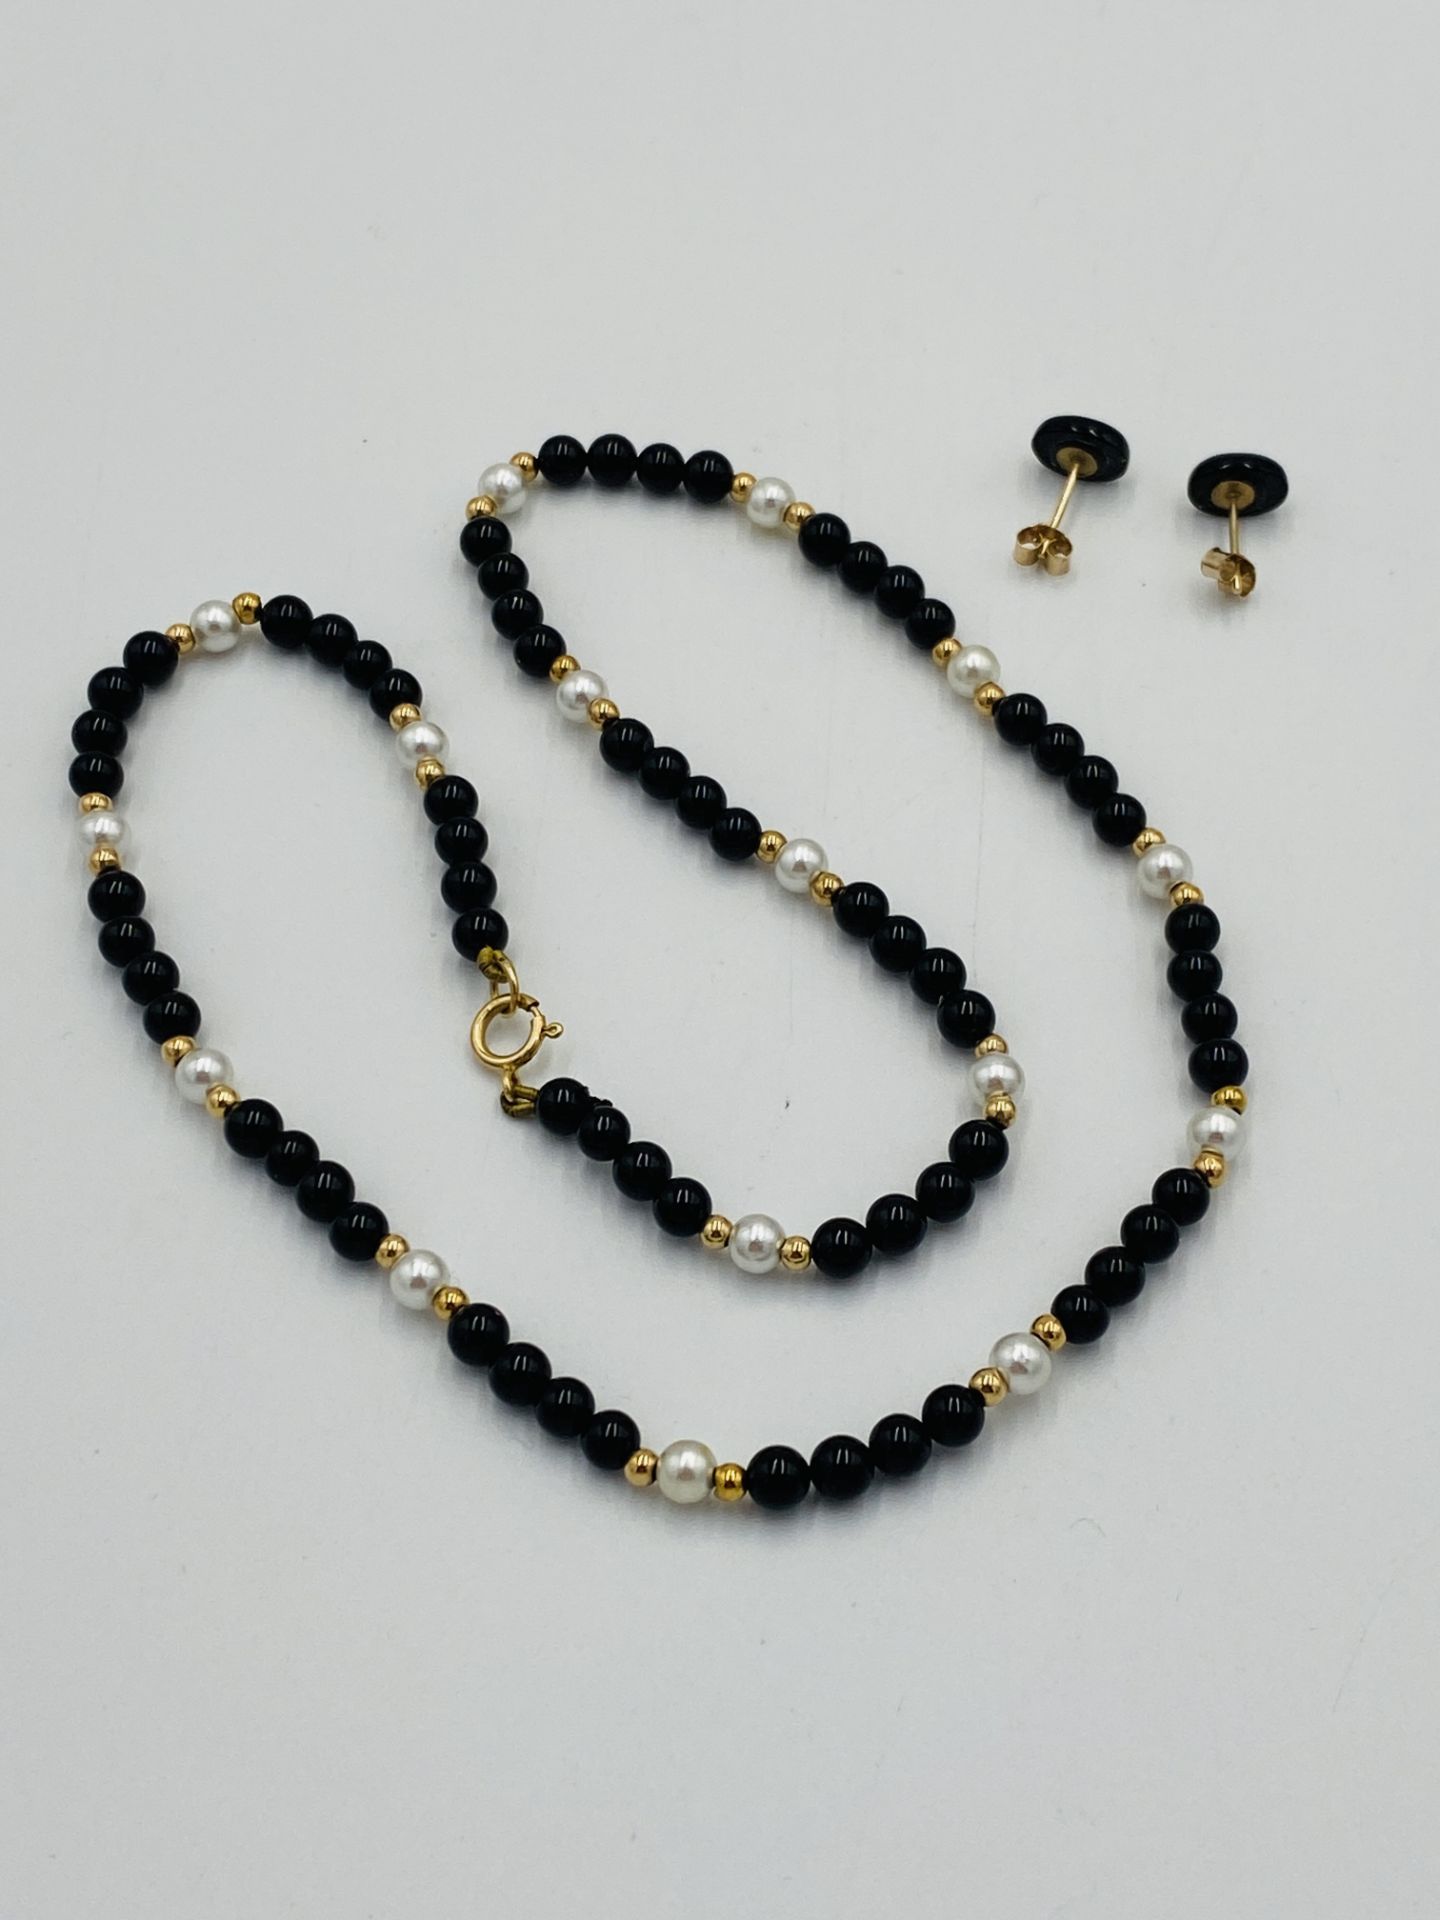 Bead necklace with 9ct gold clasp,together with matching earrings